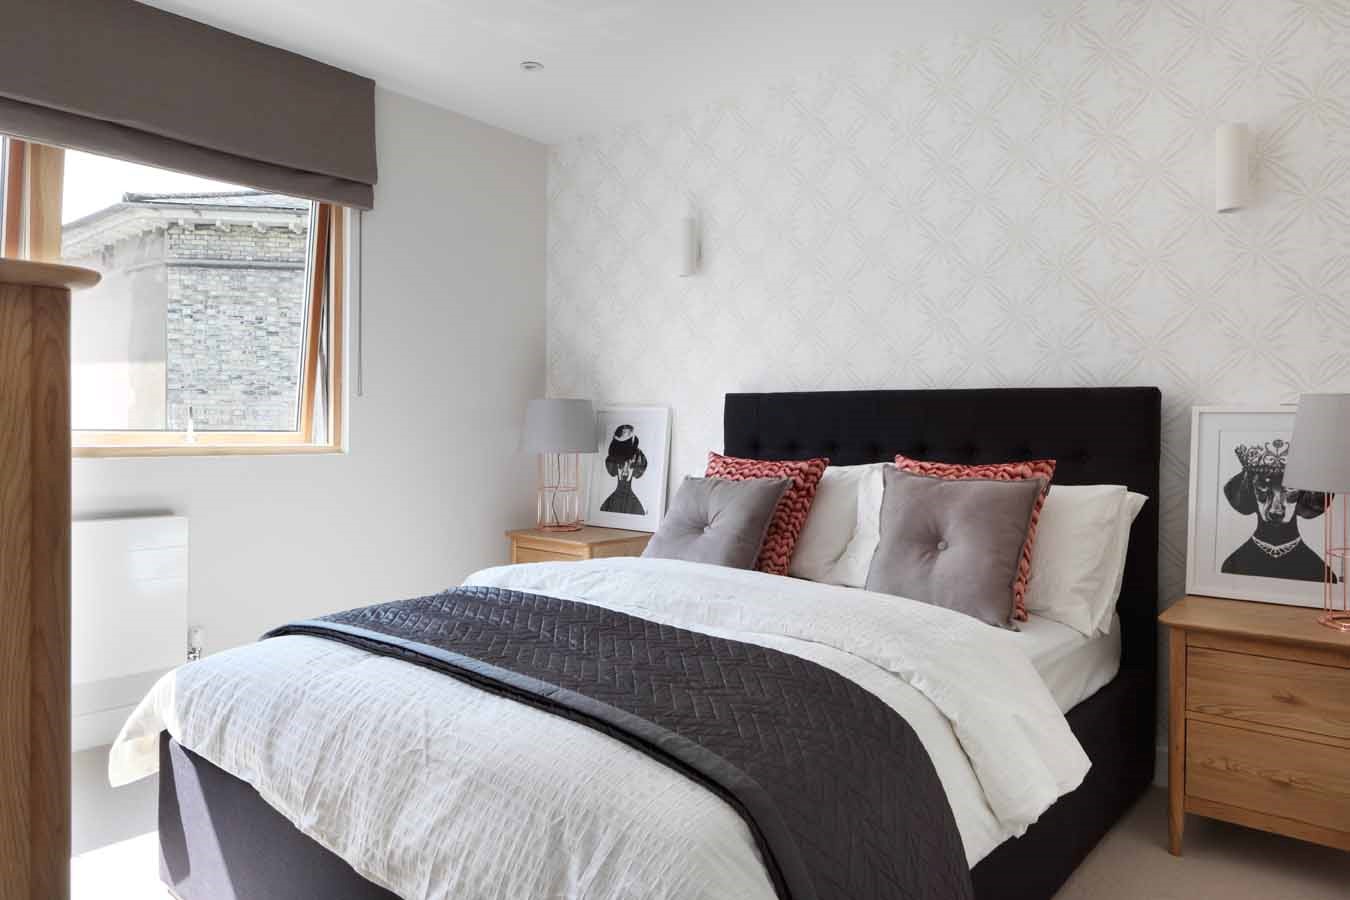 Master bedroom; double bed; upholstered headboard; padded wall paper; roman blinds